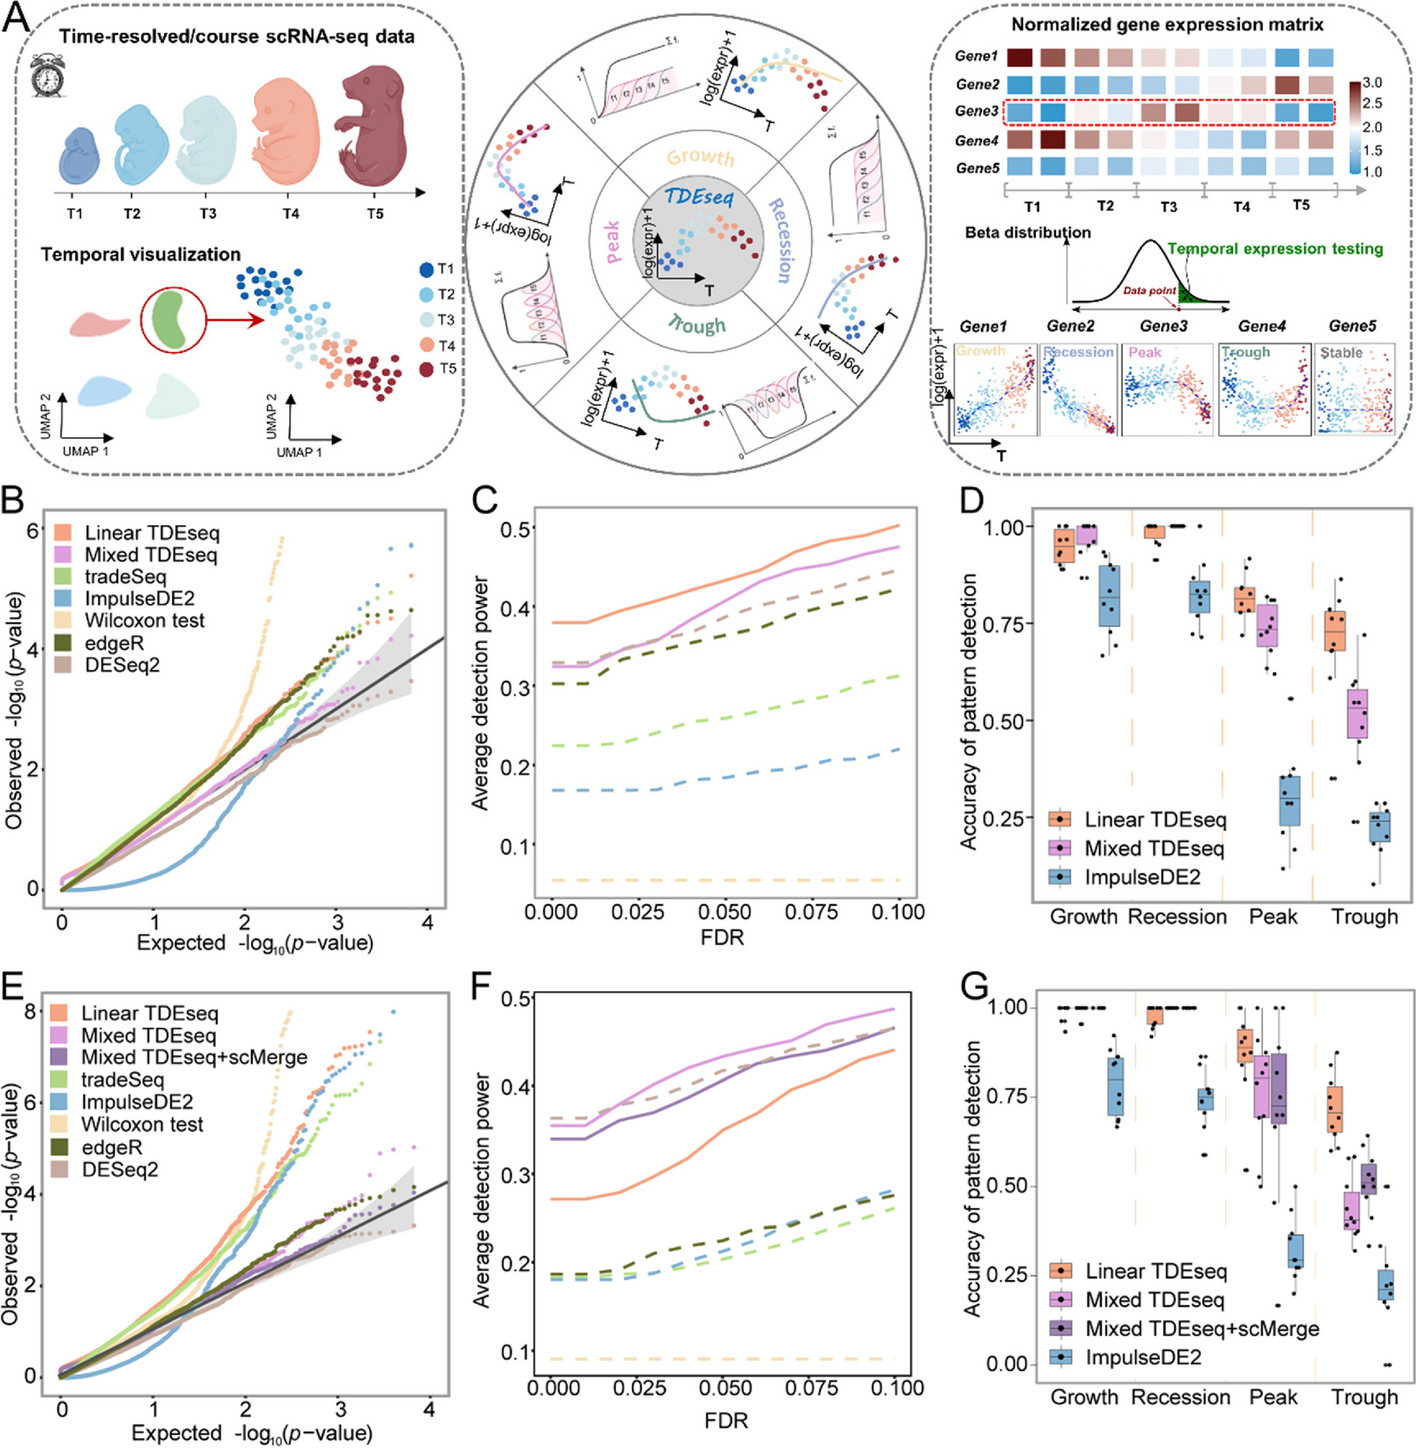 Powerful and accurate detection of temporal gene expression patterns from multi-sample multi-stage single-cell transcriptomics data with TDEseq